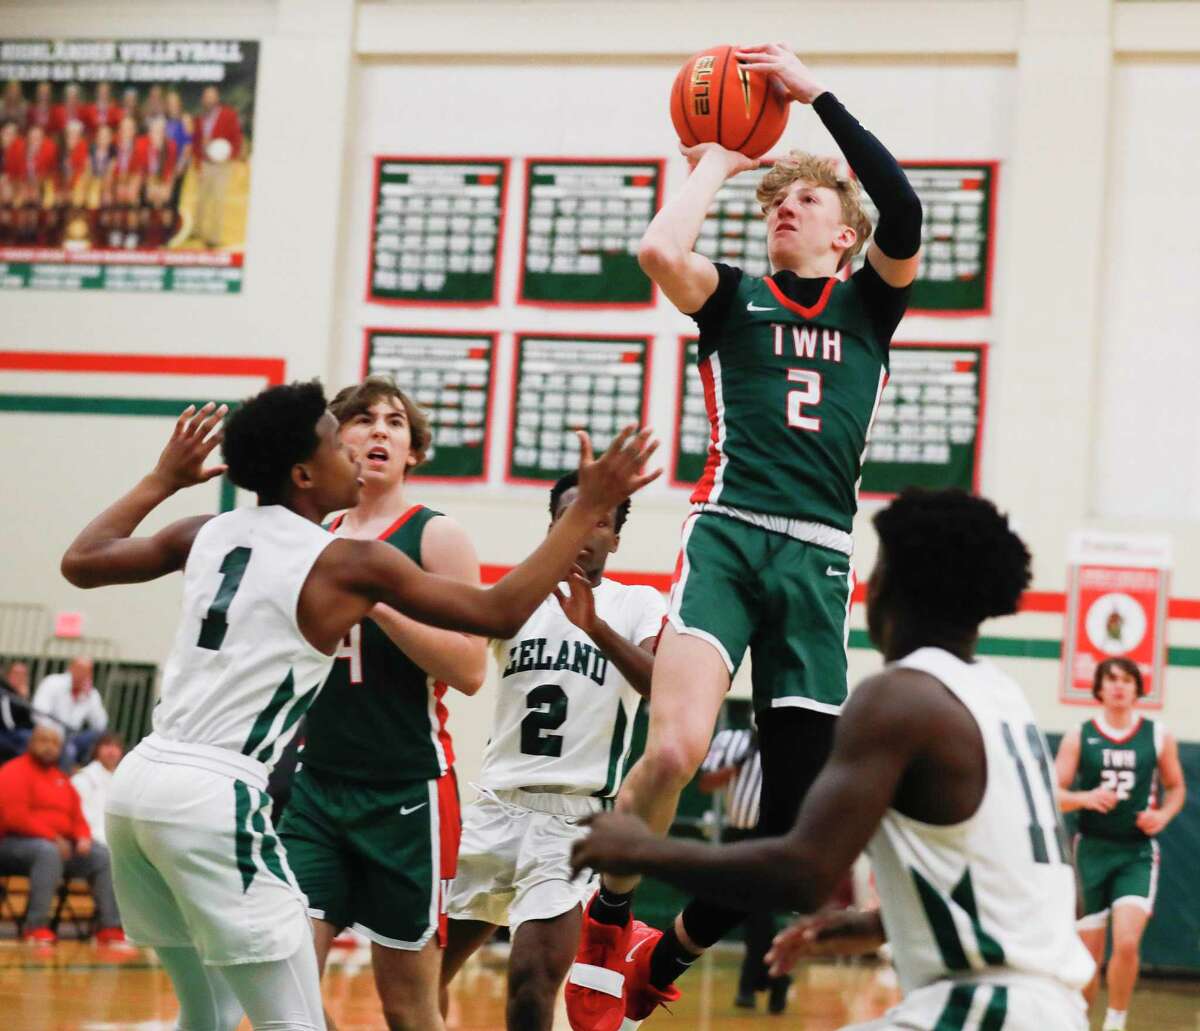 The Woodlands’ Shey Eberwein (2) shoots between defenders during a game at the Rebounders Club Classic at The Woodlands High School, Friday, Nov. 26, 2021, in The Woodlands.